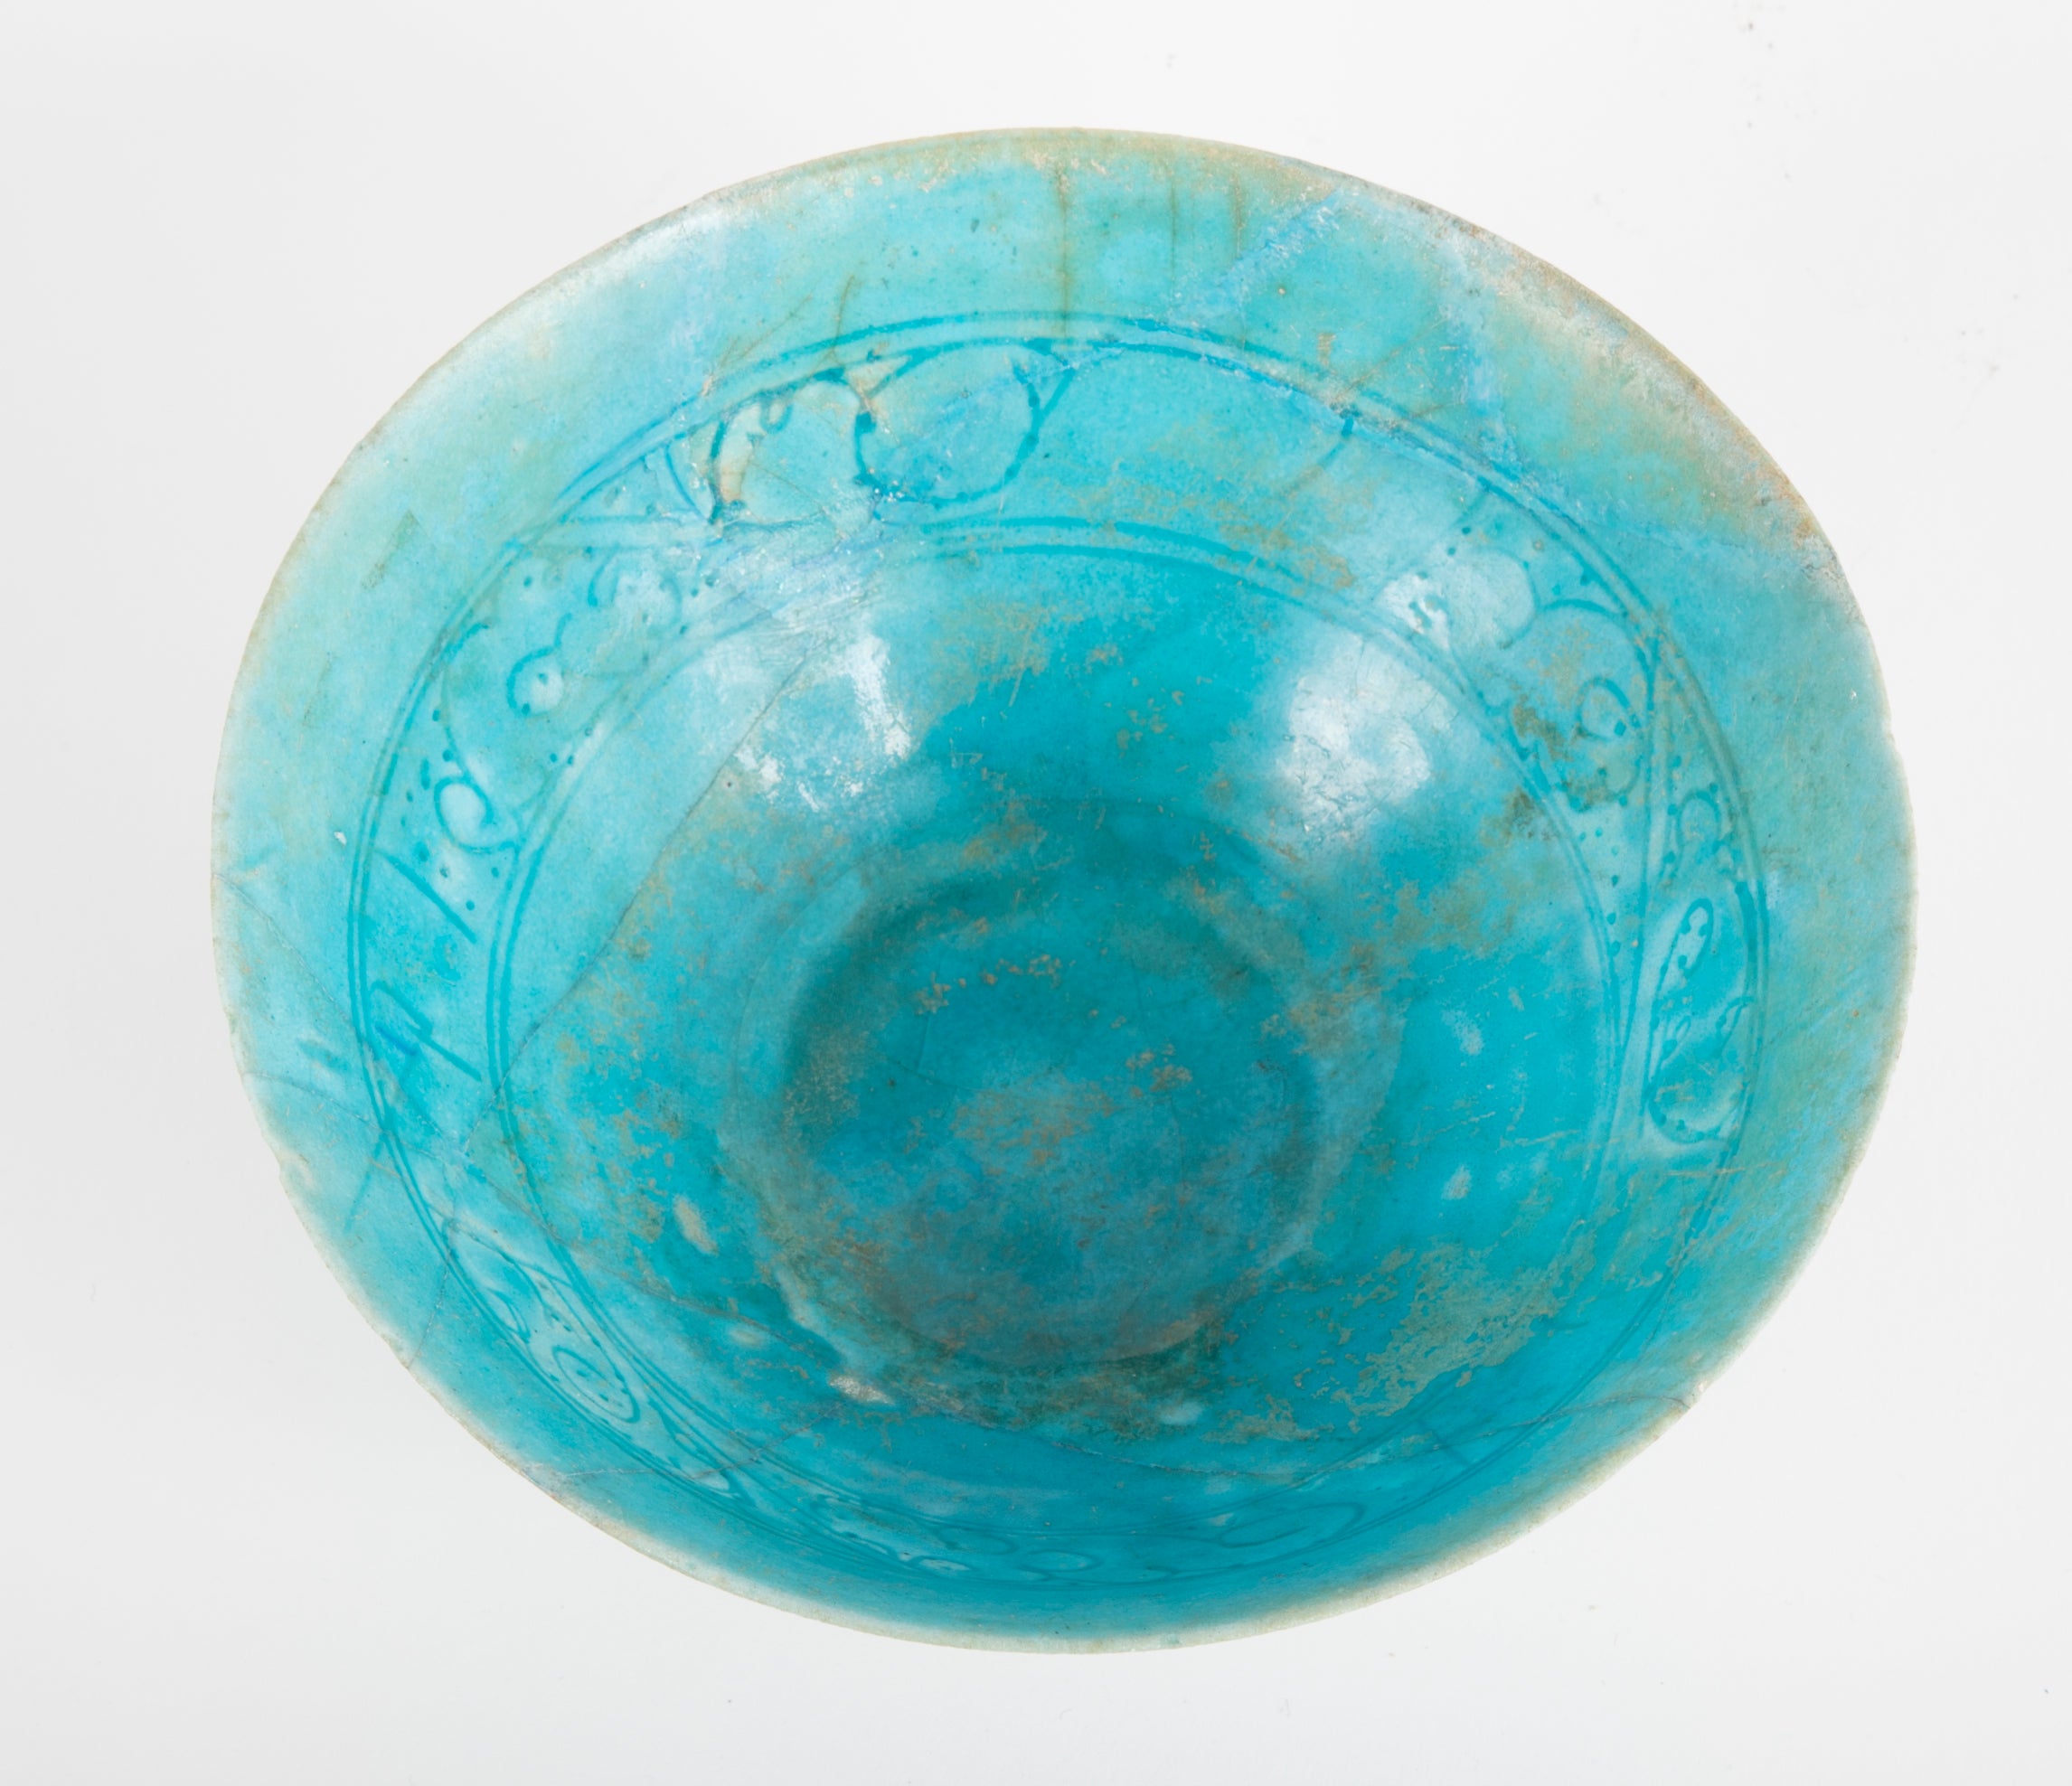 Footed Conical Form Kashan Turquoise Glazed Pottery Bowl – Avery